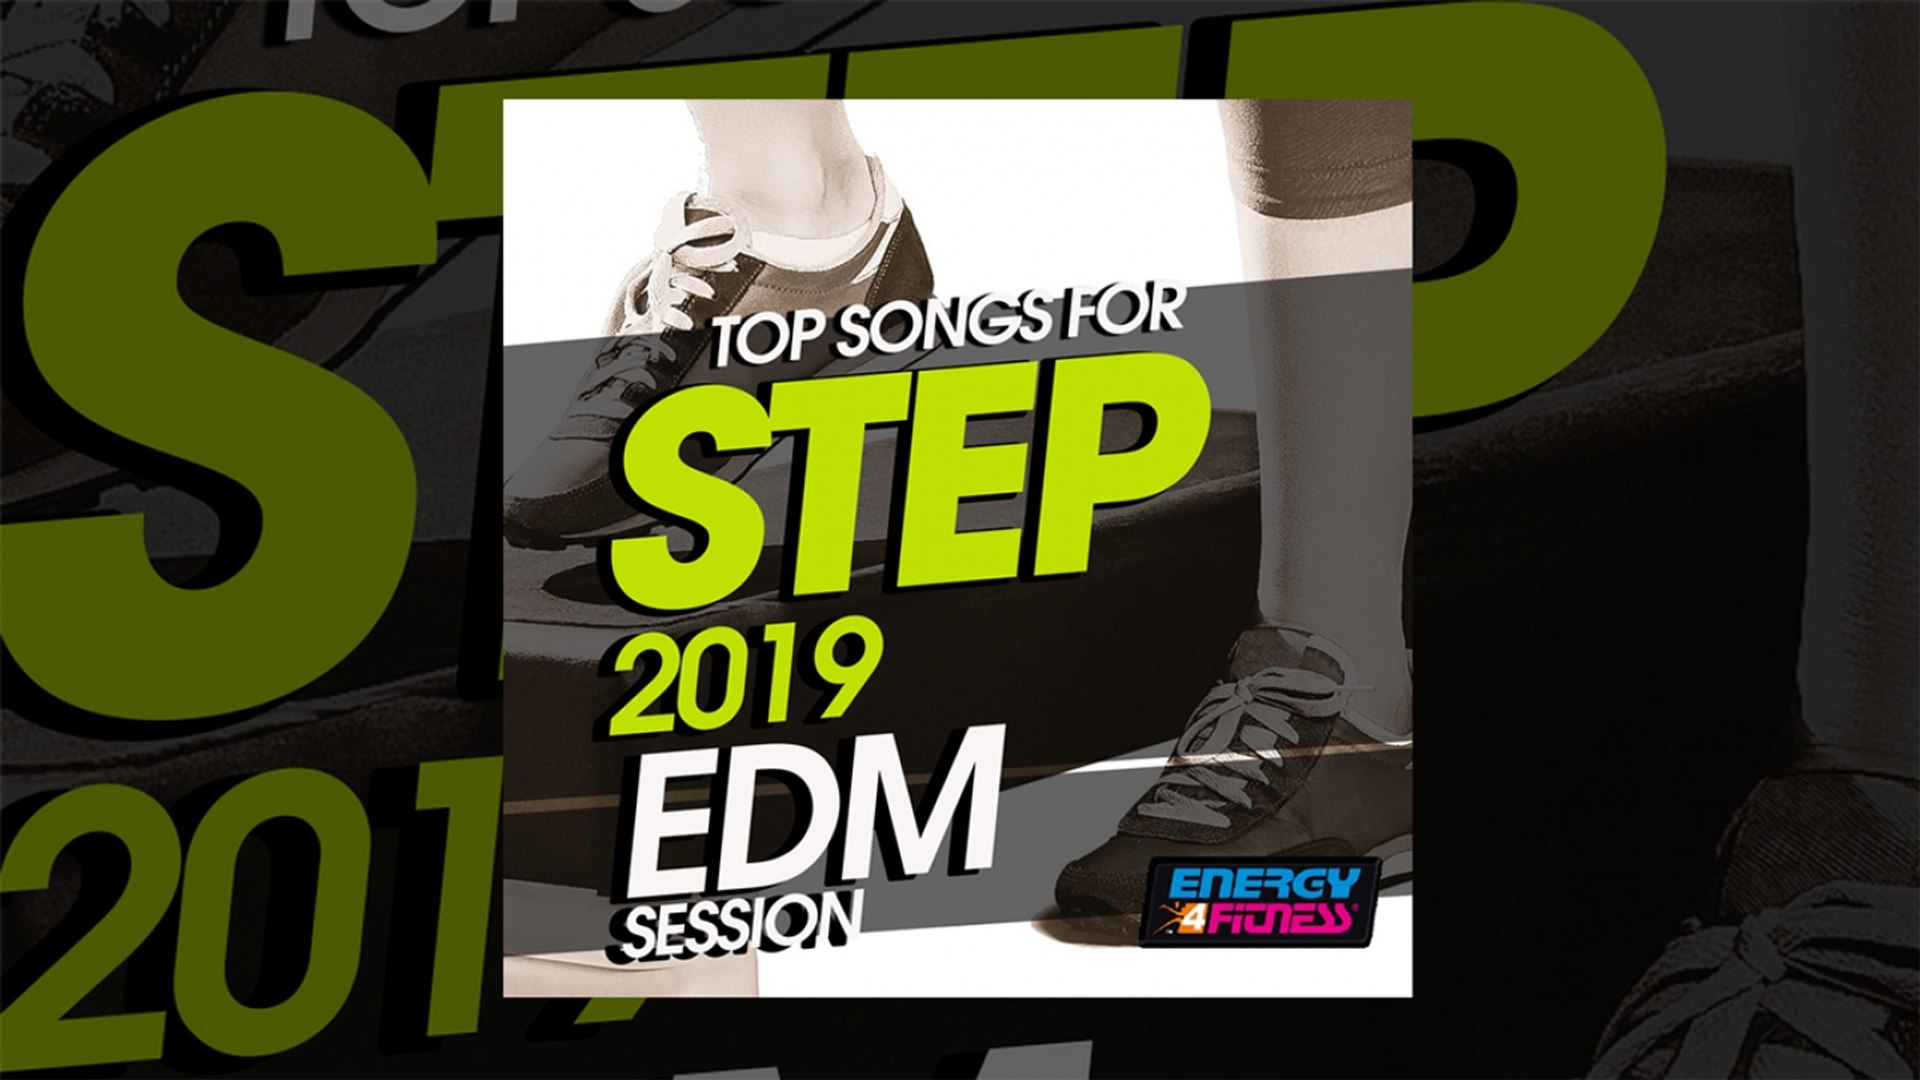 E4F - Top Songs For Step 2019 EDM Session - Fitness & Music 2019